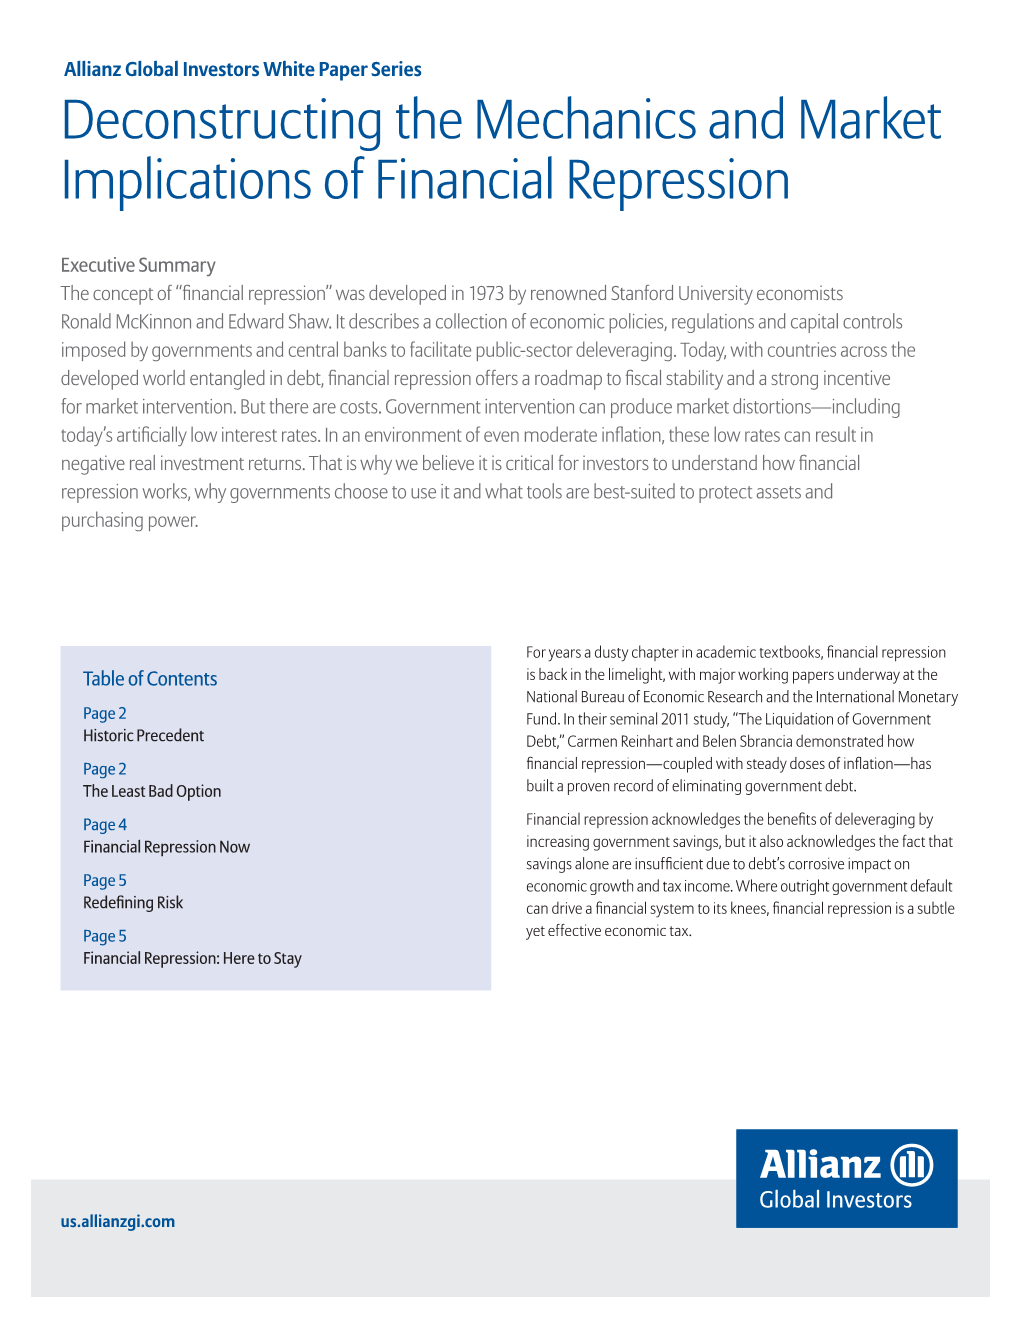 Deconstructing the Mechanics and Market Implications of Financial Repression